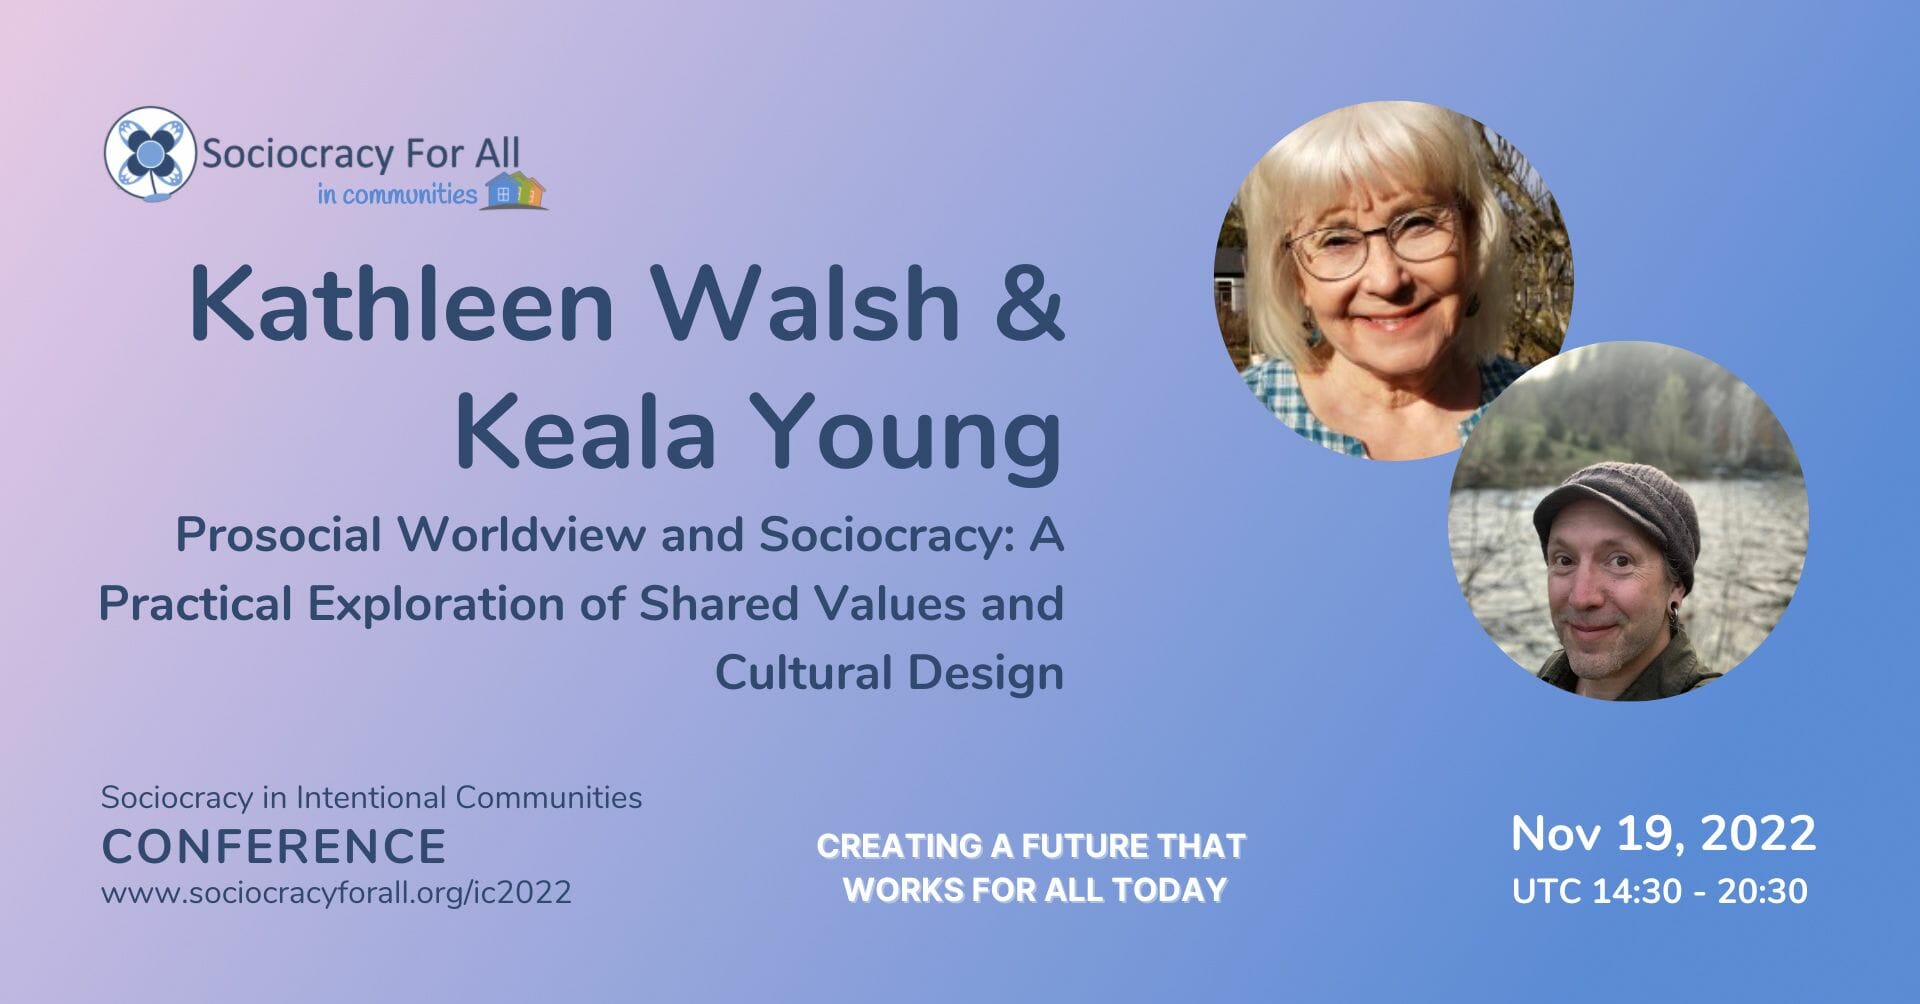 kathleen walsh keala young sociocracy in intentional communities conference 2022 - - Sociocracy For All